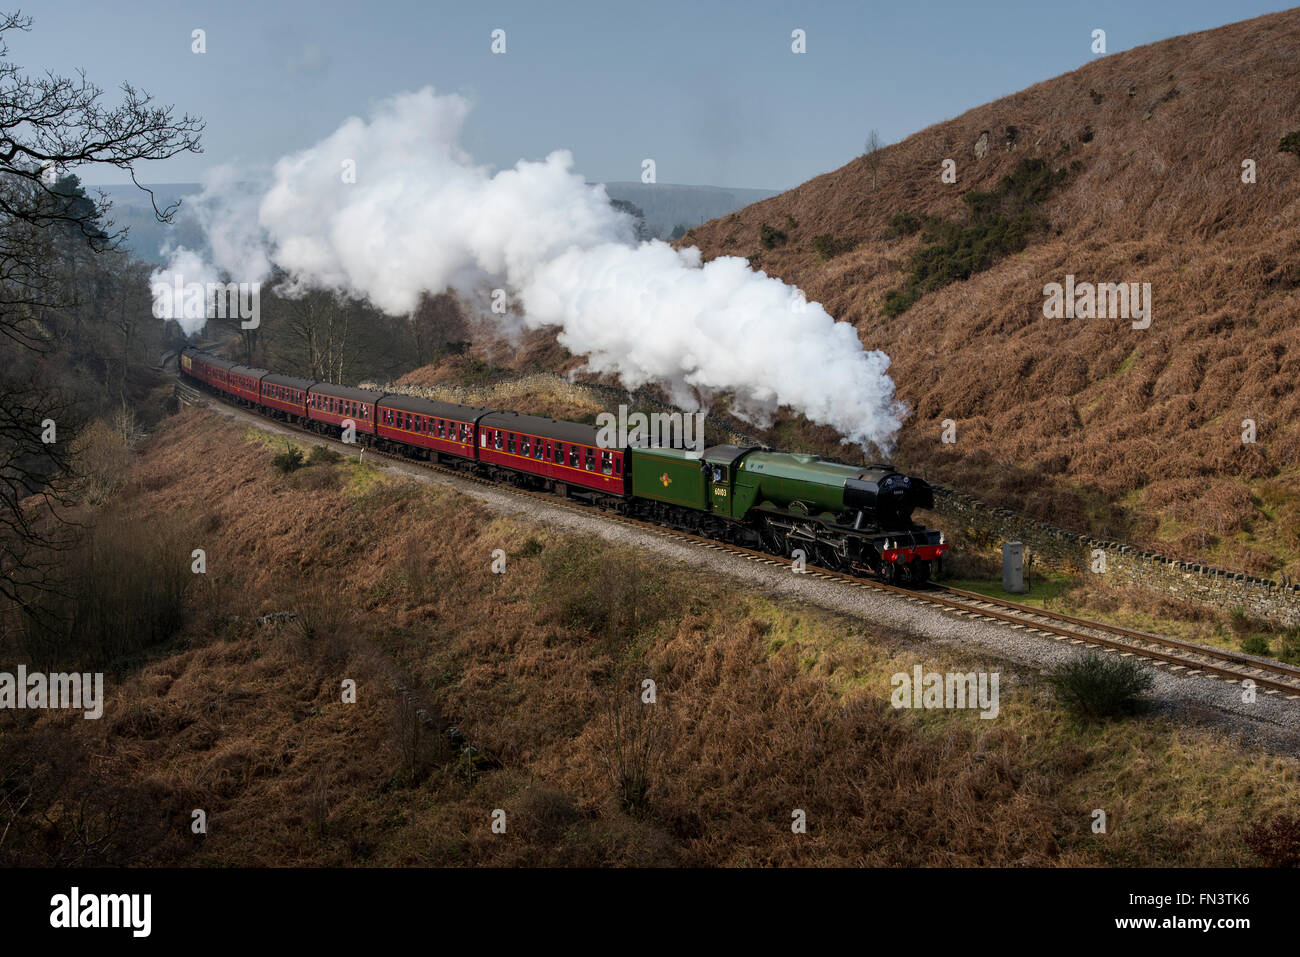 Goathland, North York Moors, UK. 13th March, 2015. Following a £4.2 million overhaul, the LNER Class A3 “Pacific” steam locomotive number 60103 "Flying Scotsman"  returns to passenger service on the North York Moors Railway. In full steam she passes Hawthorn Hill on her approach to Goathland station. Credit:  Dave Pressland/Alamy Live News. Stock Photo